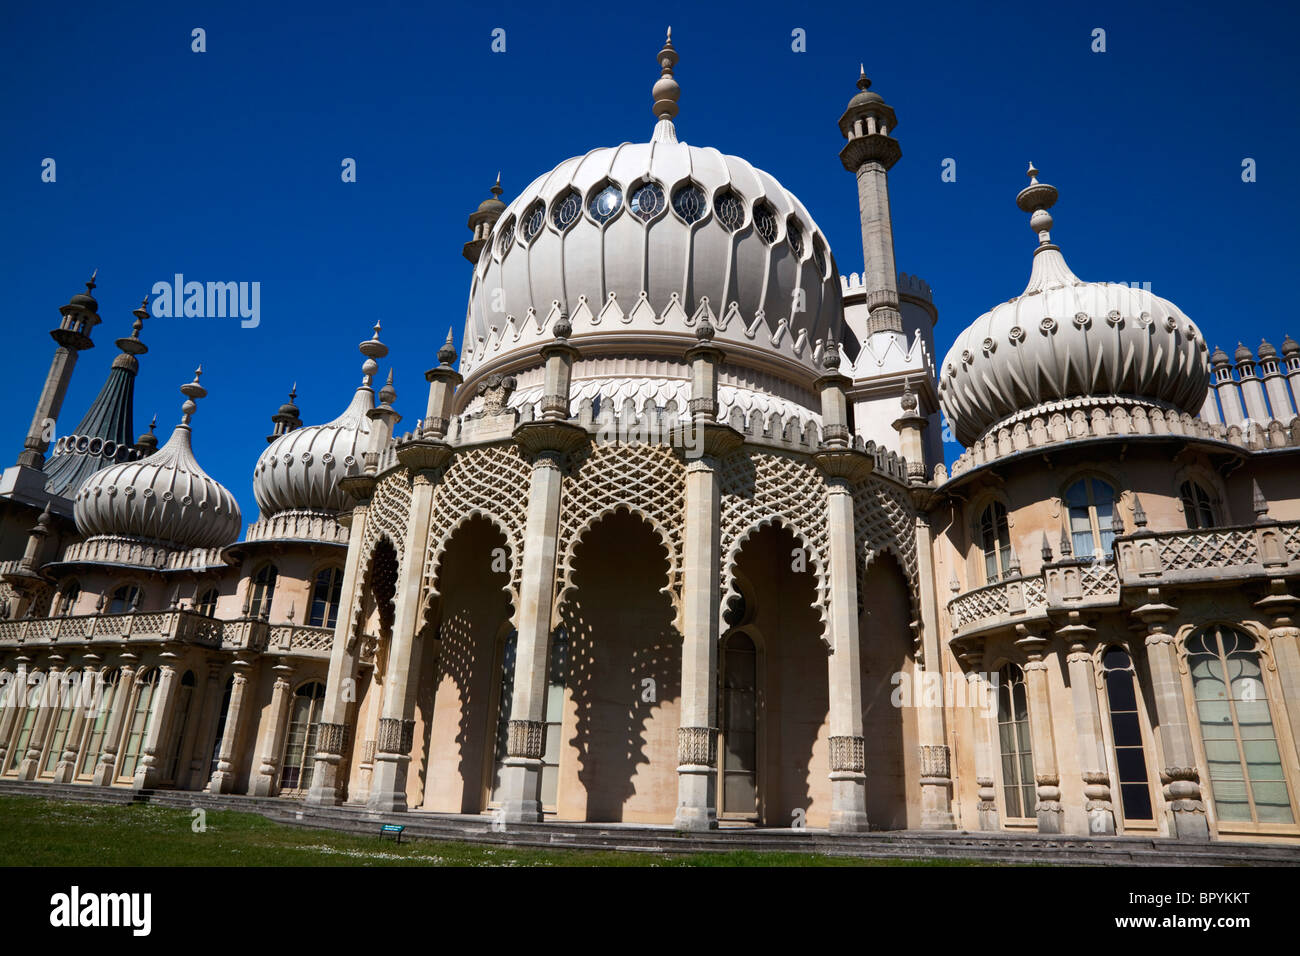 England, East Sussex, Brighton, The Royal Pavilion, 19th century retreat for the then Prince Regent, Designed by John Nash. Stock Photo